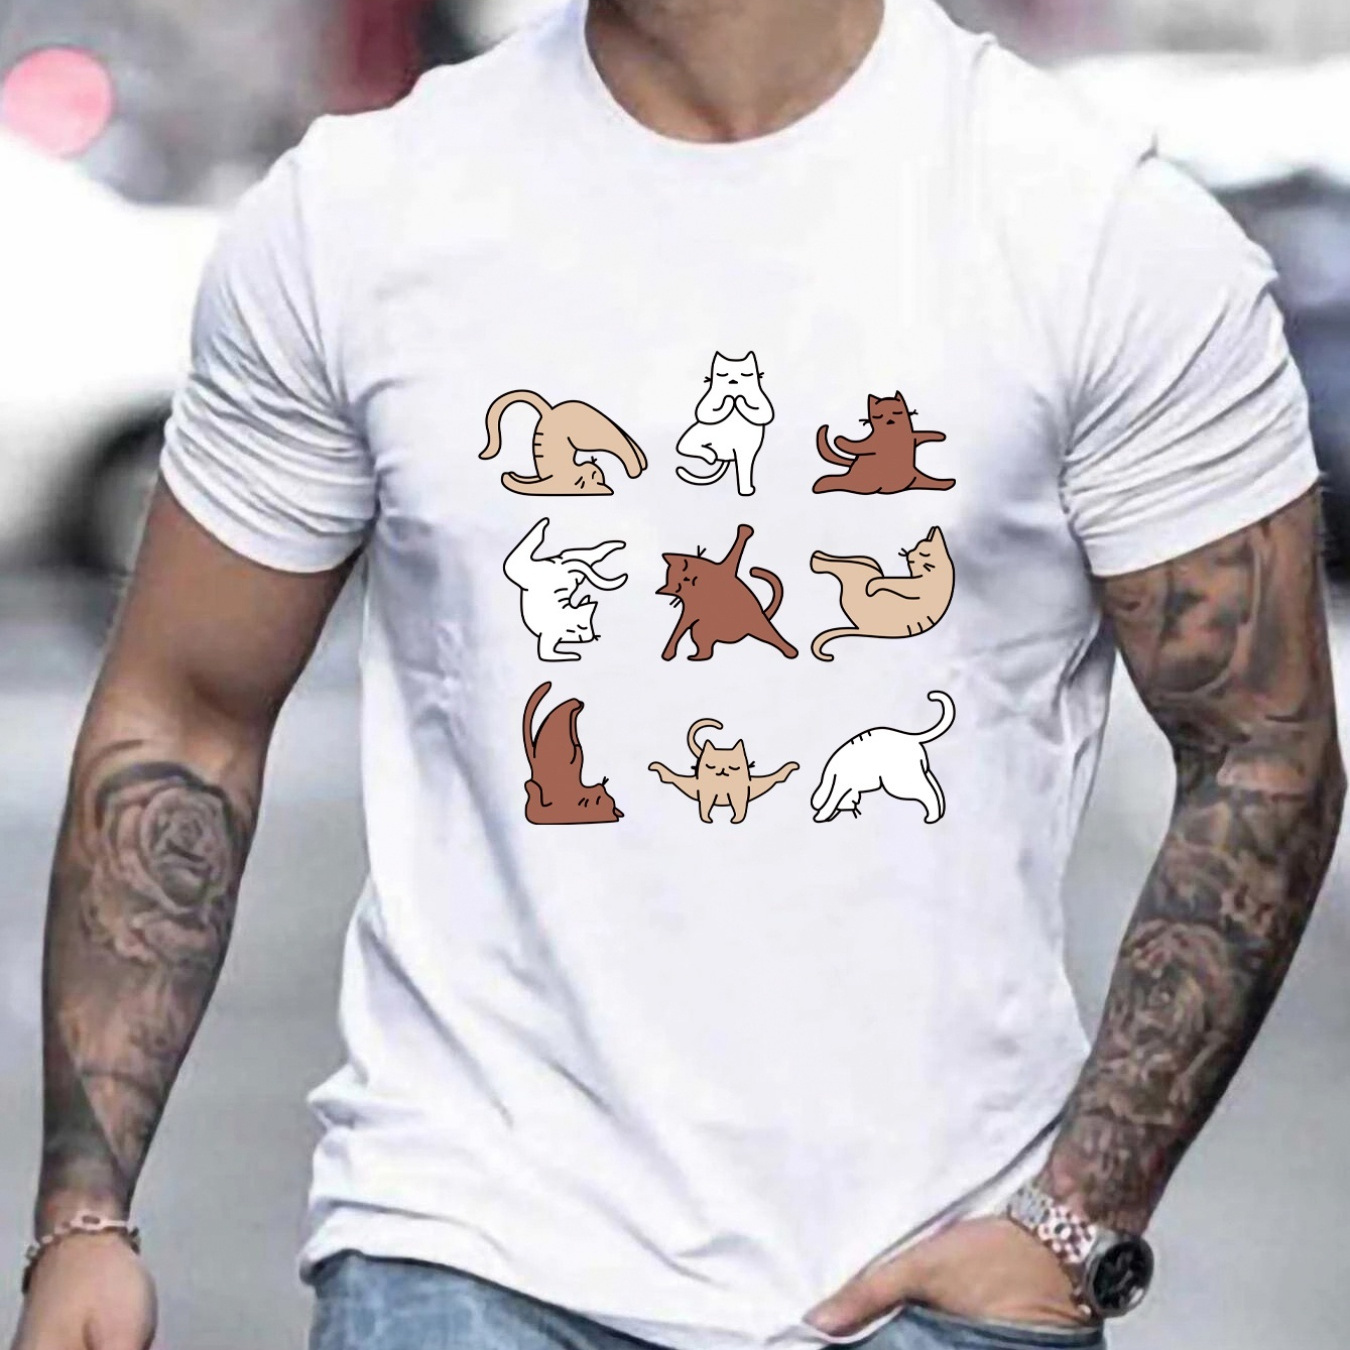 

Cute Cats Pattern Print Men's Slightly Stretch T-shirt, Graphic Tee Men's Summer Clothes, Men's Outfits